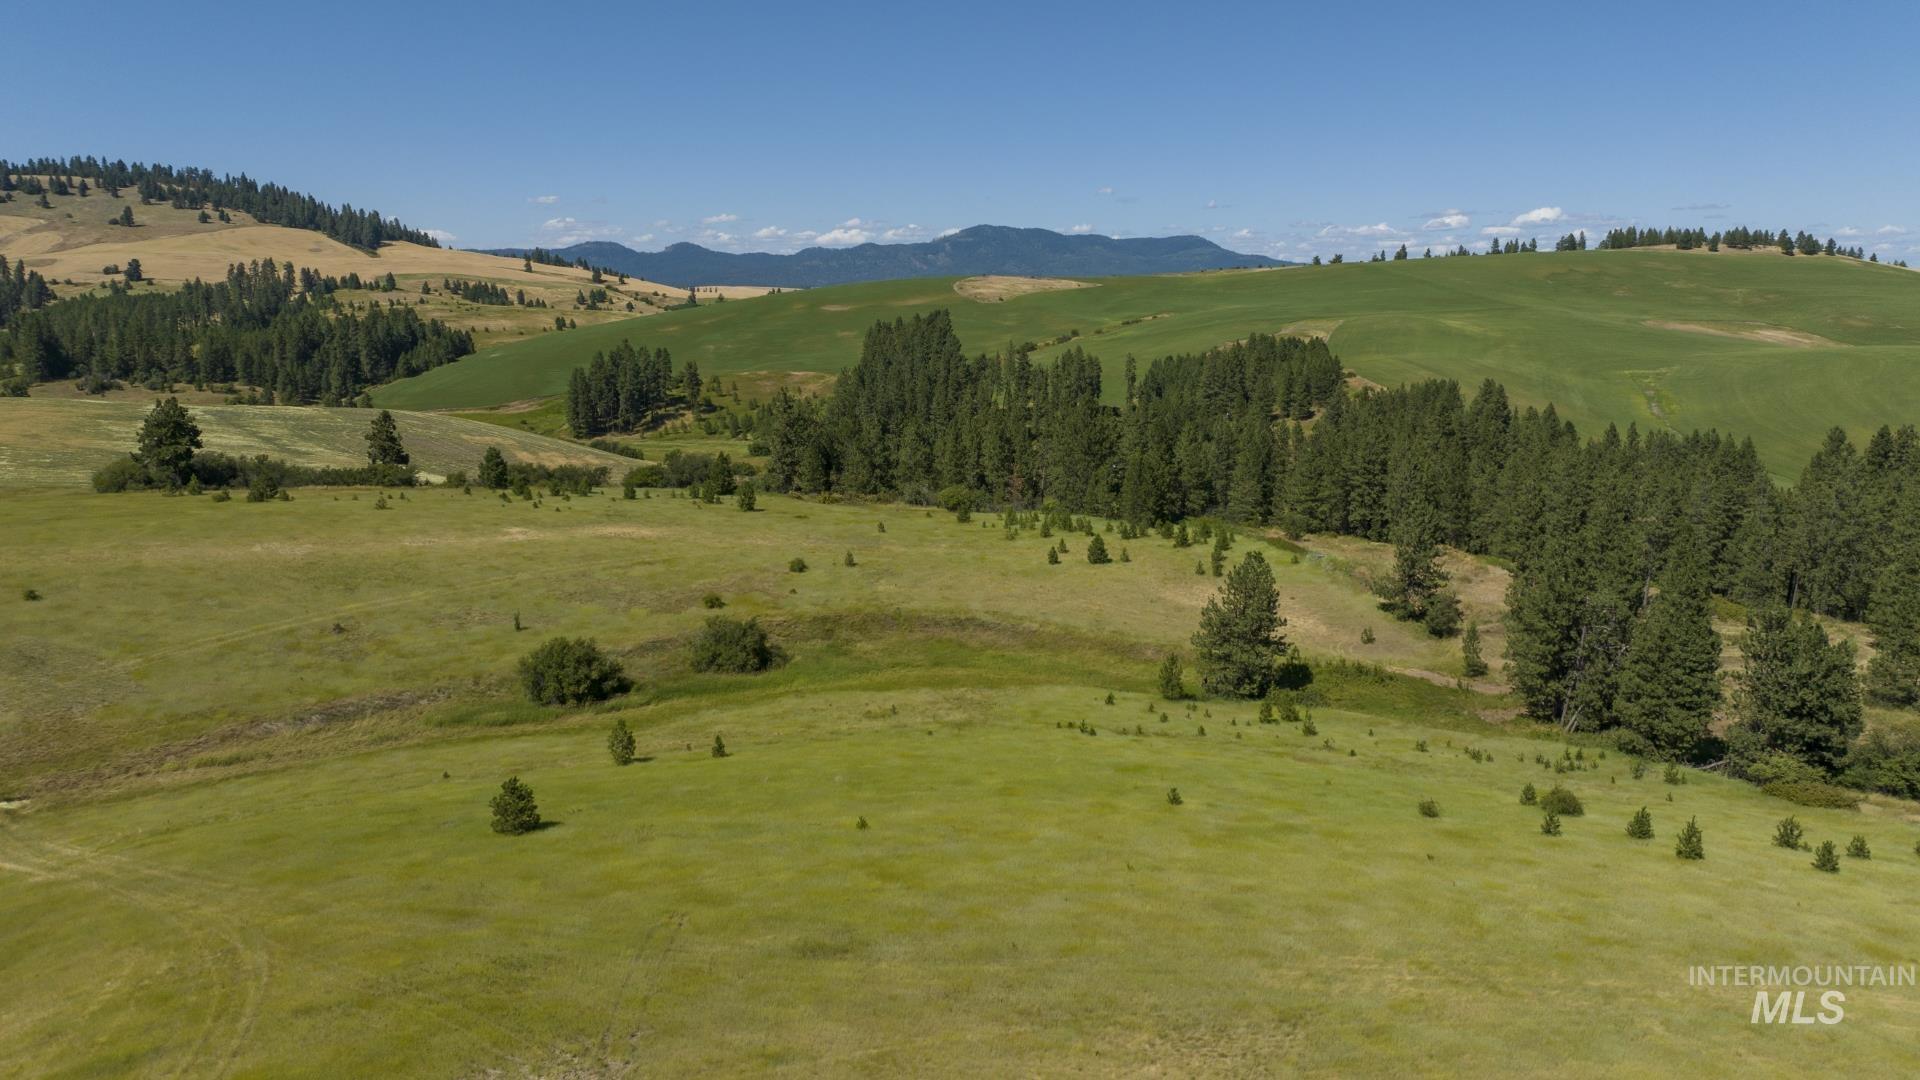 TBD Parcel # 2 Lenville, Moscow, Idaho 83843, Land For Sale, Price $472,305,MLS 98906677